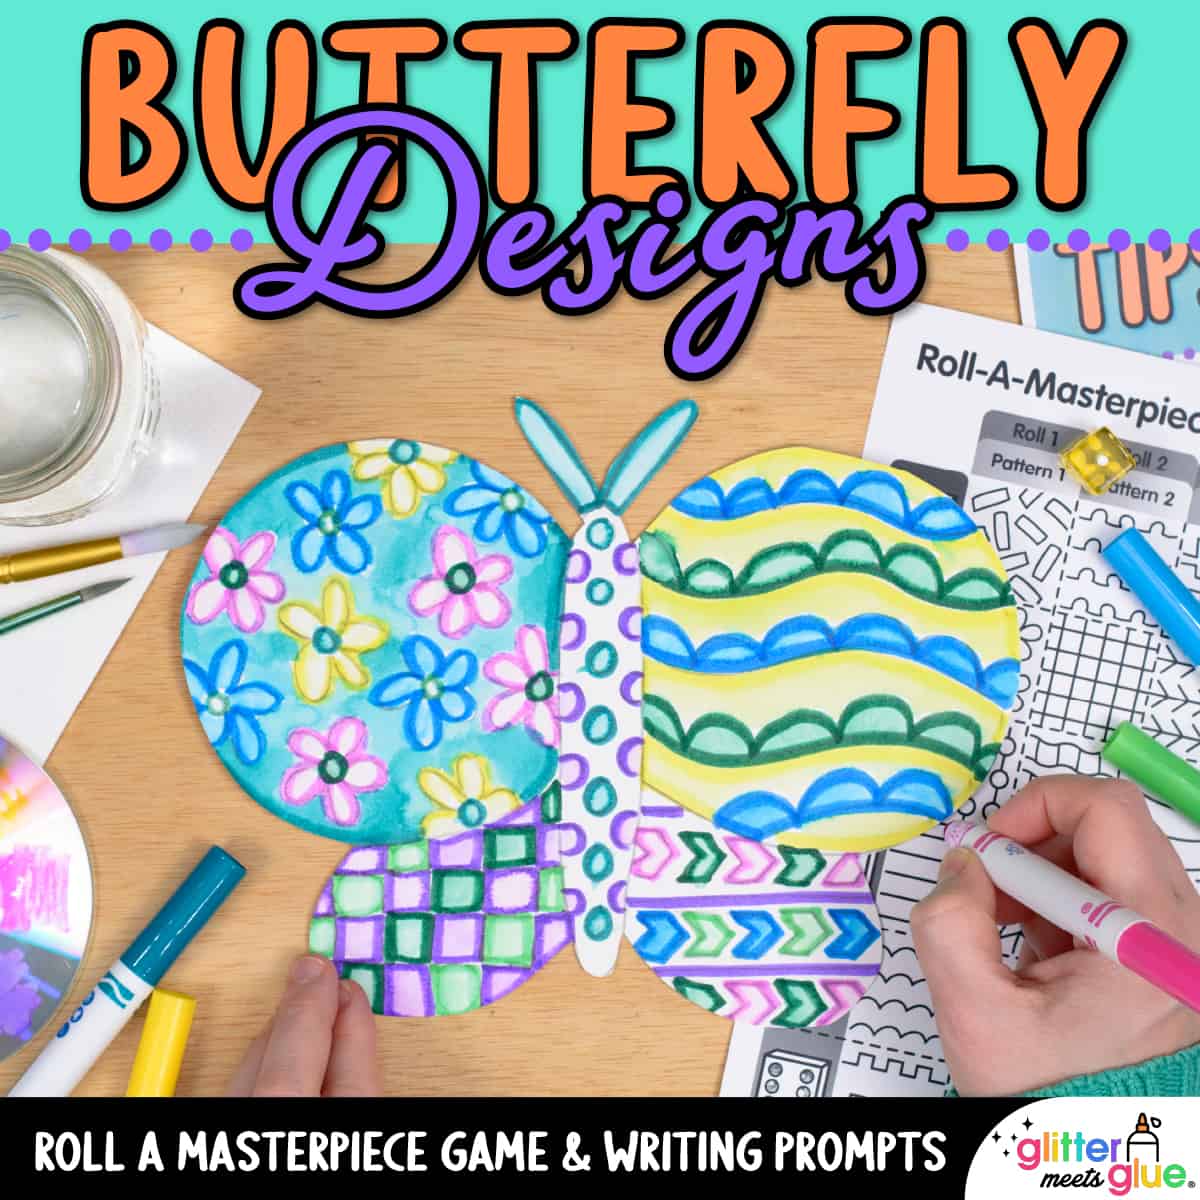 Toddler Butterfly Craft: Math Art! - How Wee Learn